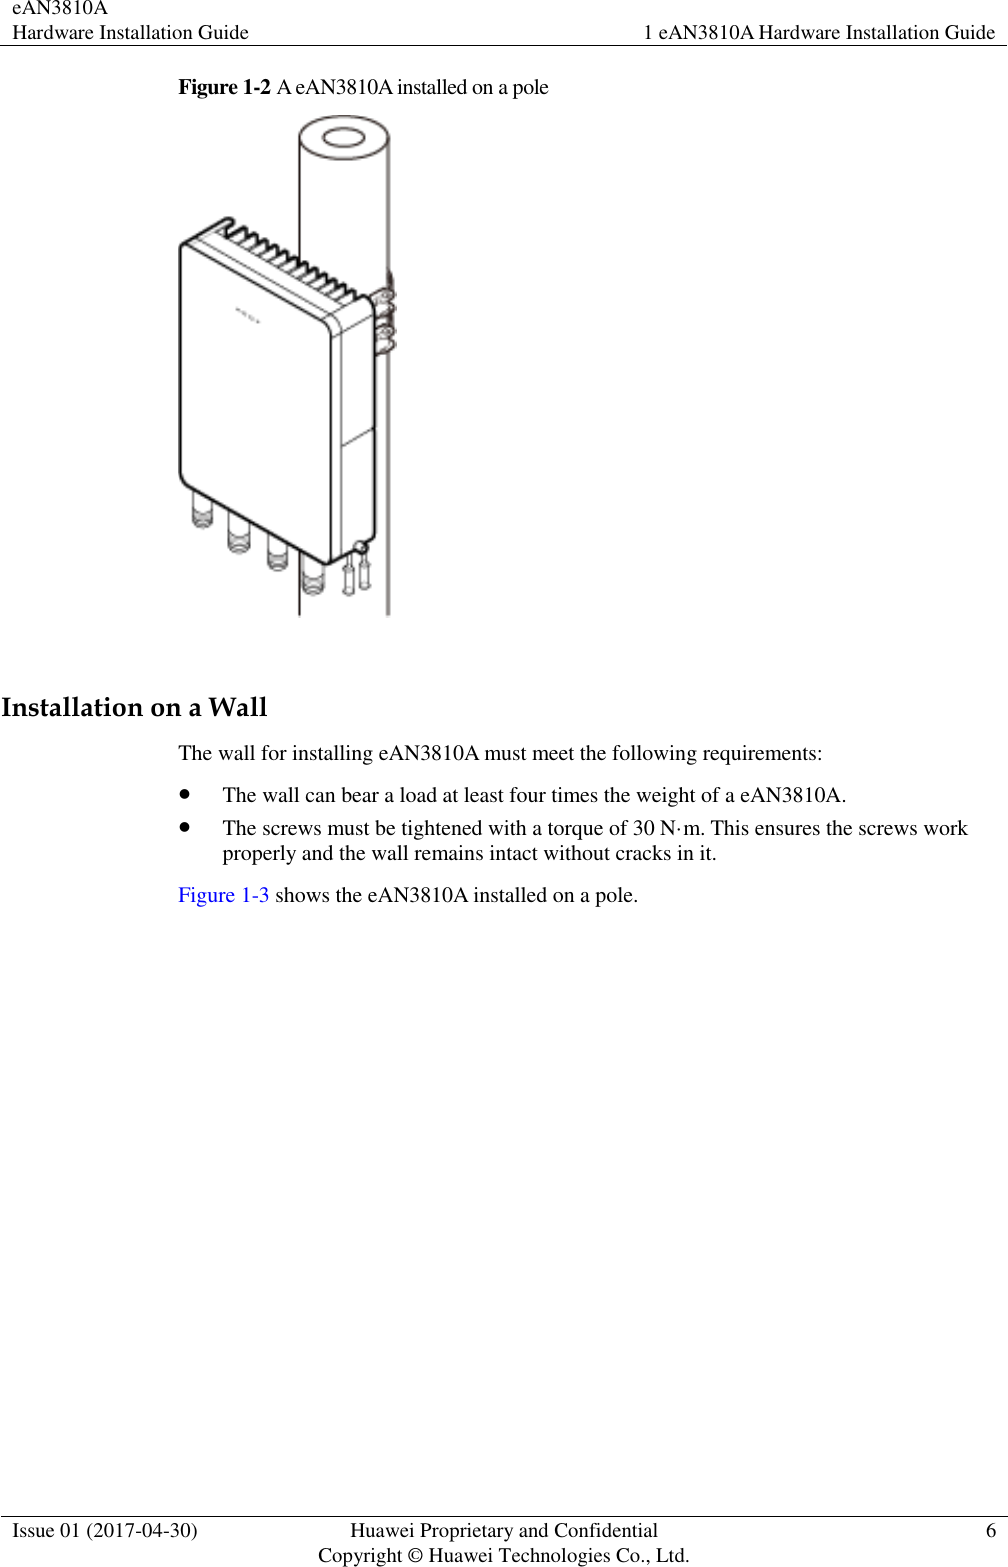 eAN3810A   Hardware Installation Guide 1 eAN3810A Hardware Installation Guide  Issue 01 (2017-04-30) Huawei Proprietary and Confidential                                     Copyright © Huawei Technologies Co., Ltd. 6  Figure 1-2 A eAN3810A installed on a pole   Installation on a Wall The wall for installing eAN3810A must meet the following requirements:    The wall can bear a load at least four times the weight of a eAN3810A.  The screws must be tightened with a torque of 30 N·m. This ensures the screws work properly and the wall remains intact without cracks in it.   Figure 1-3 shows the eAN3810A installed on a pole. 